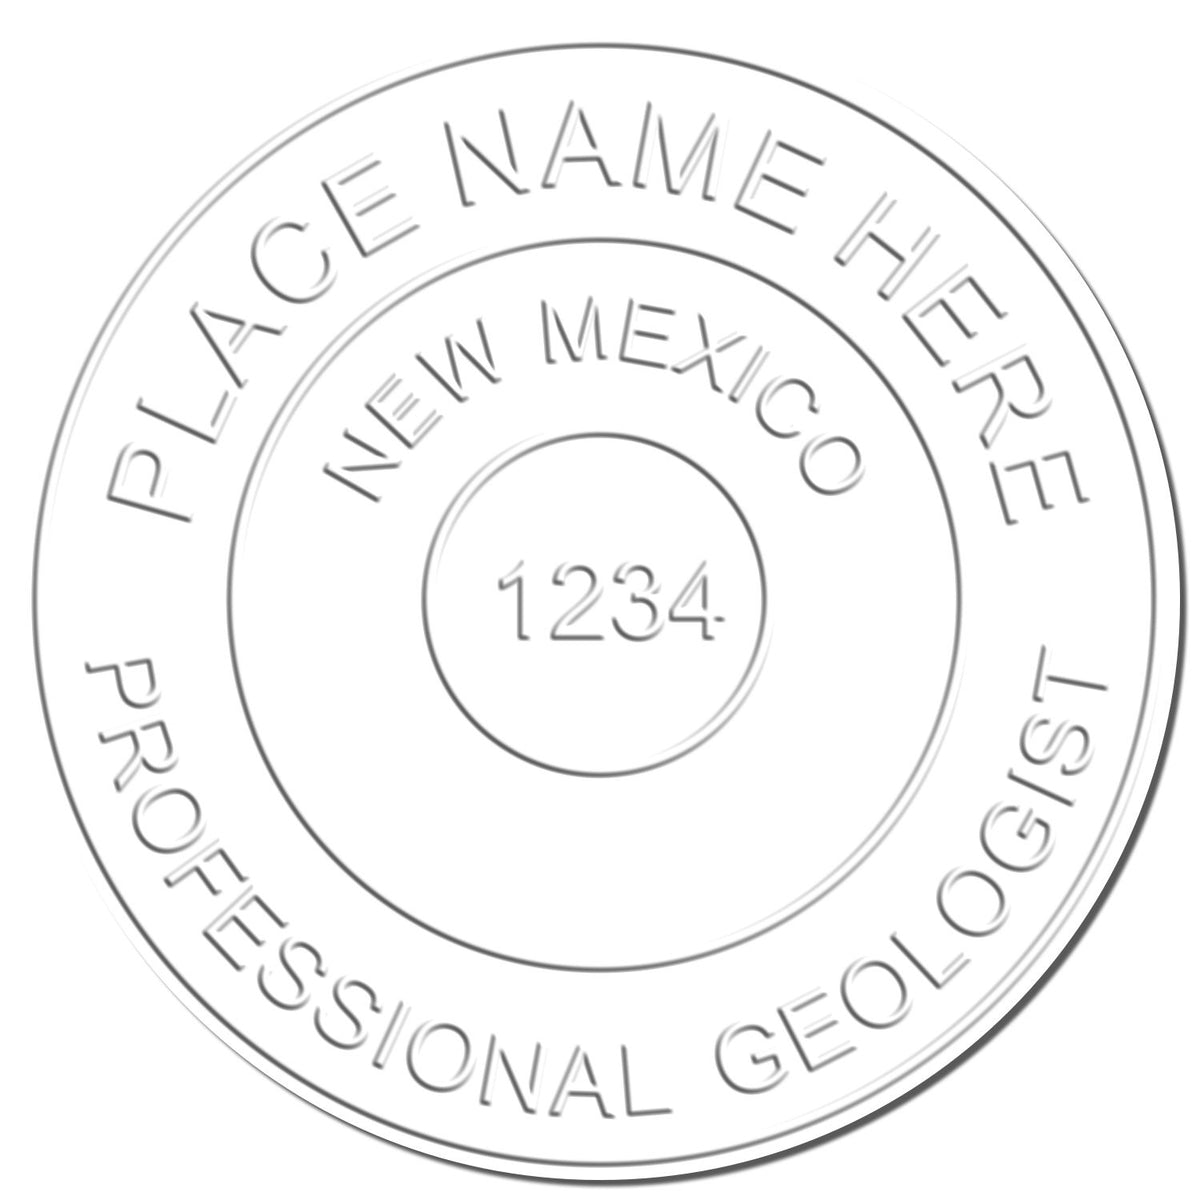 A photograph of the Hybrid New Mexico Geologist Seal stamp impression reveals a vivid, professional image of the on paper.